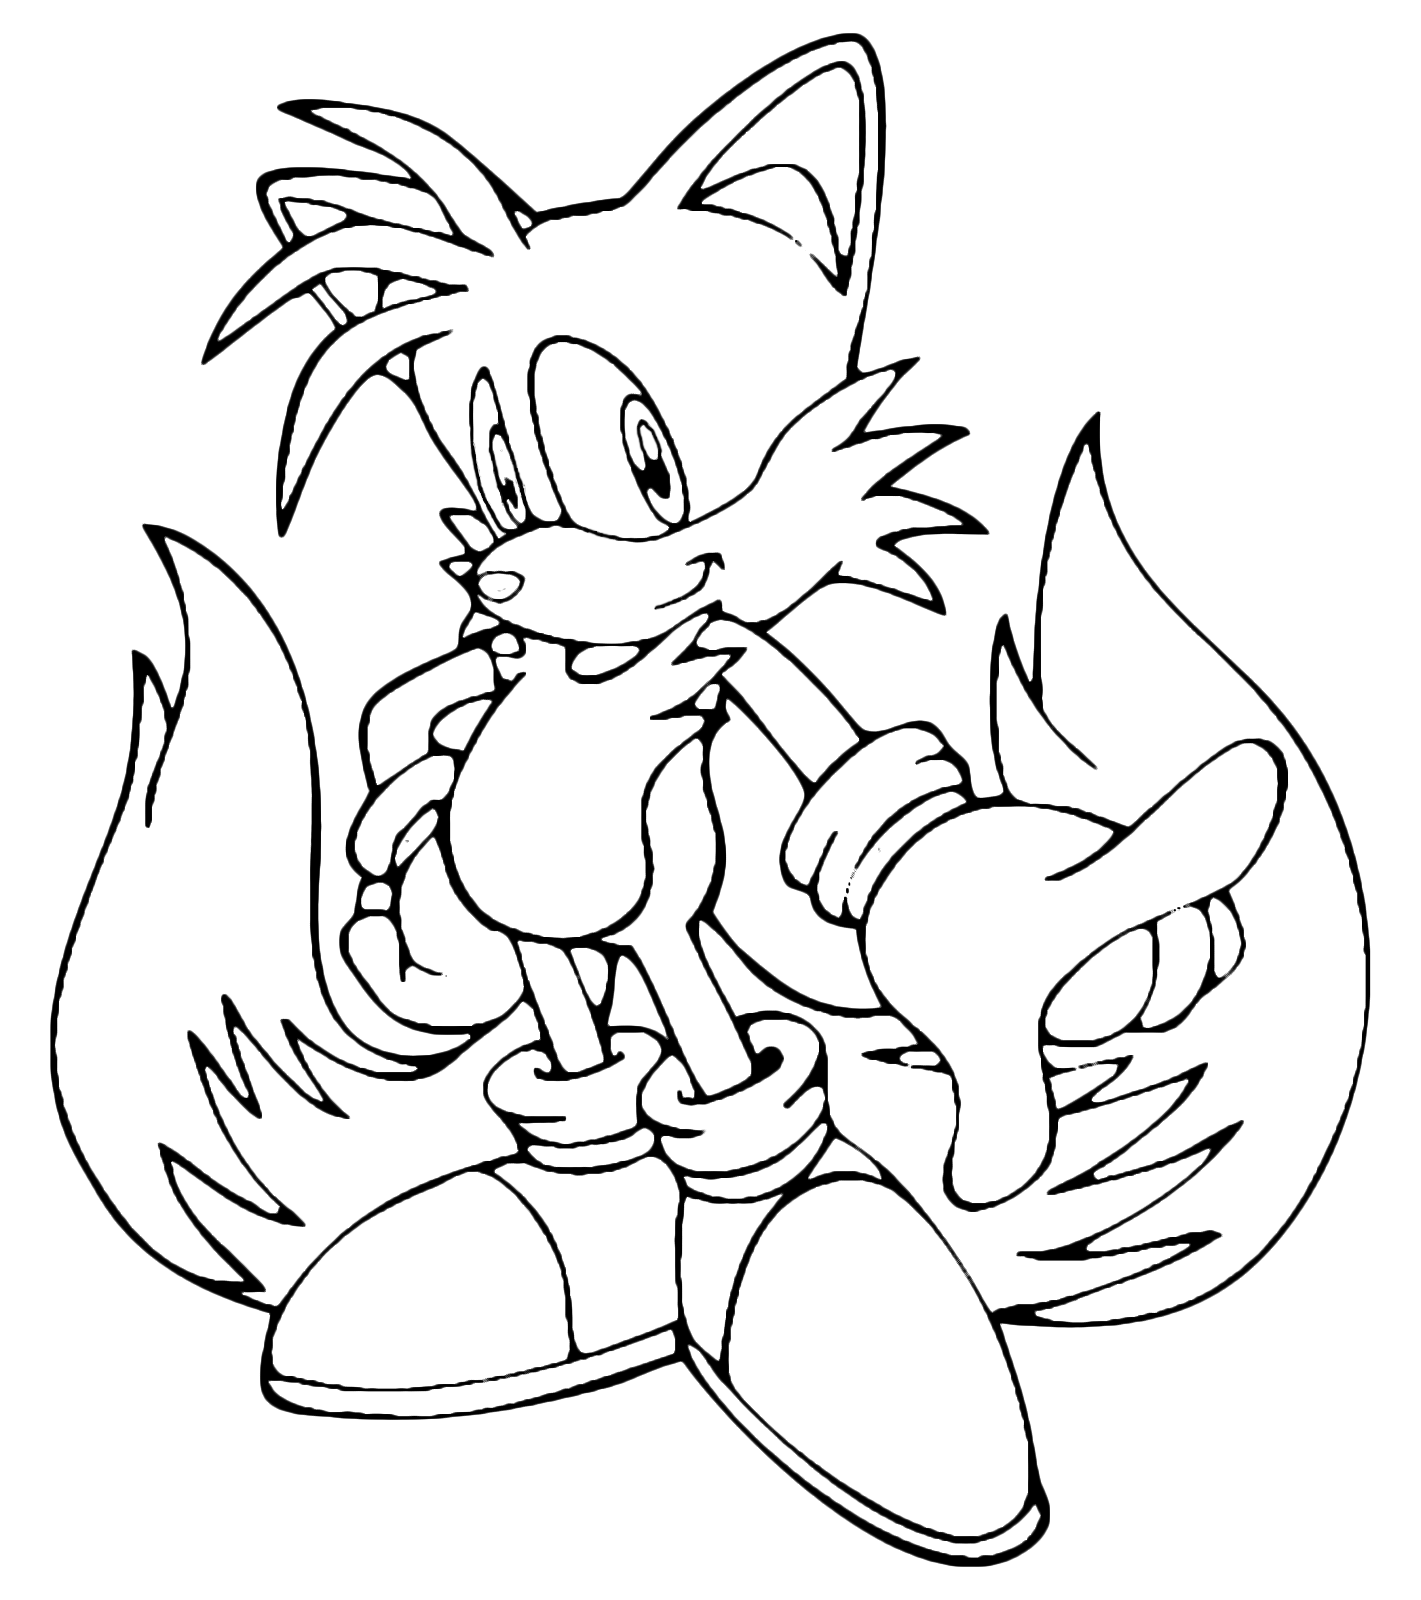 Sonic #39 s friend Knuckles Sonic Kids Coloring Pages